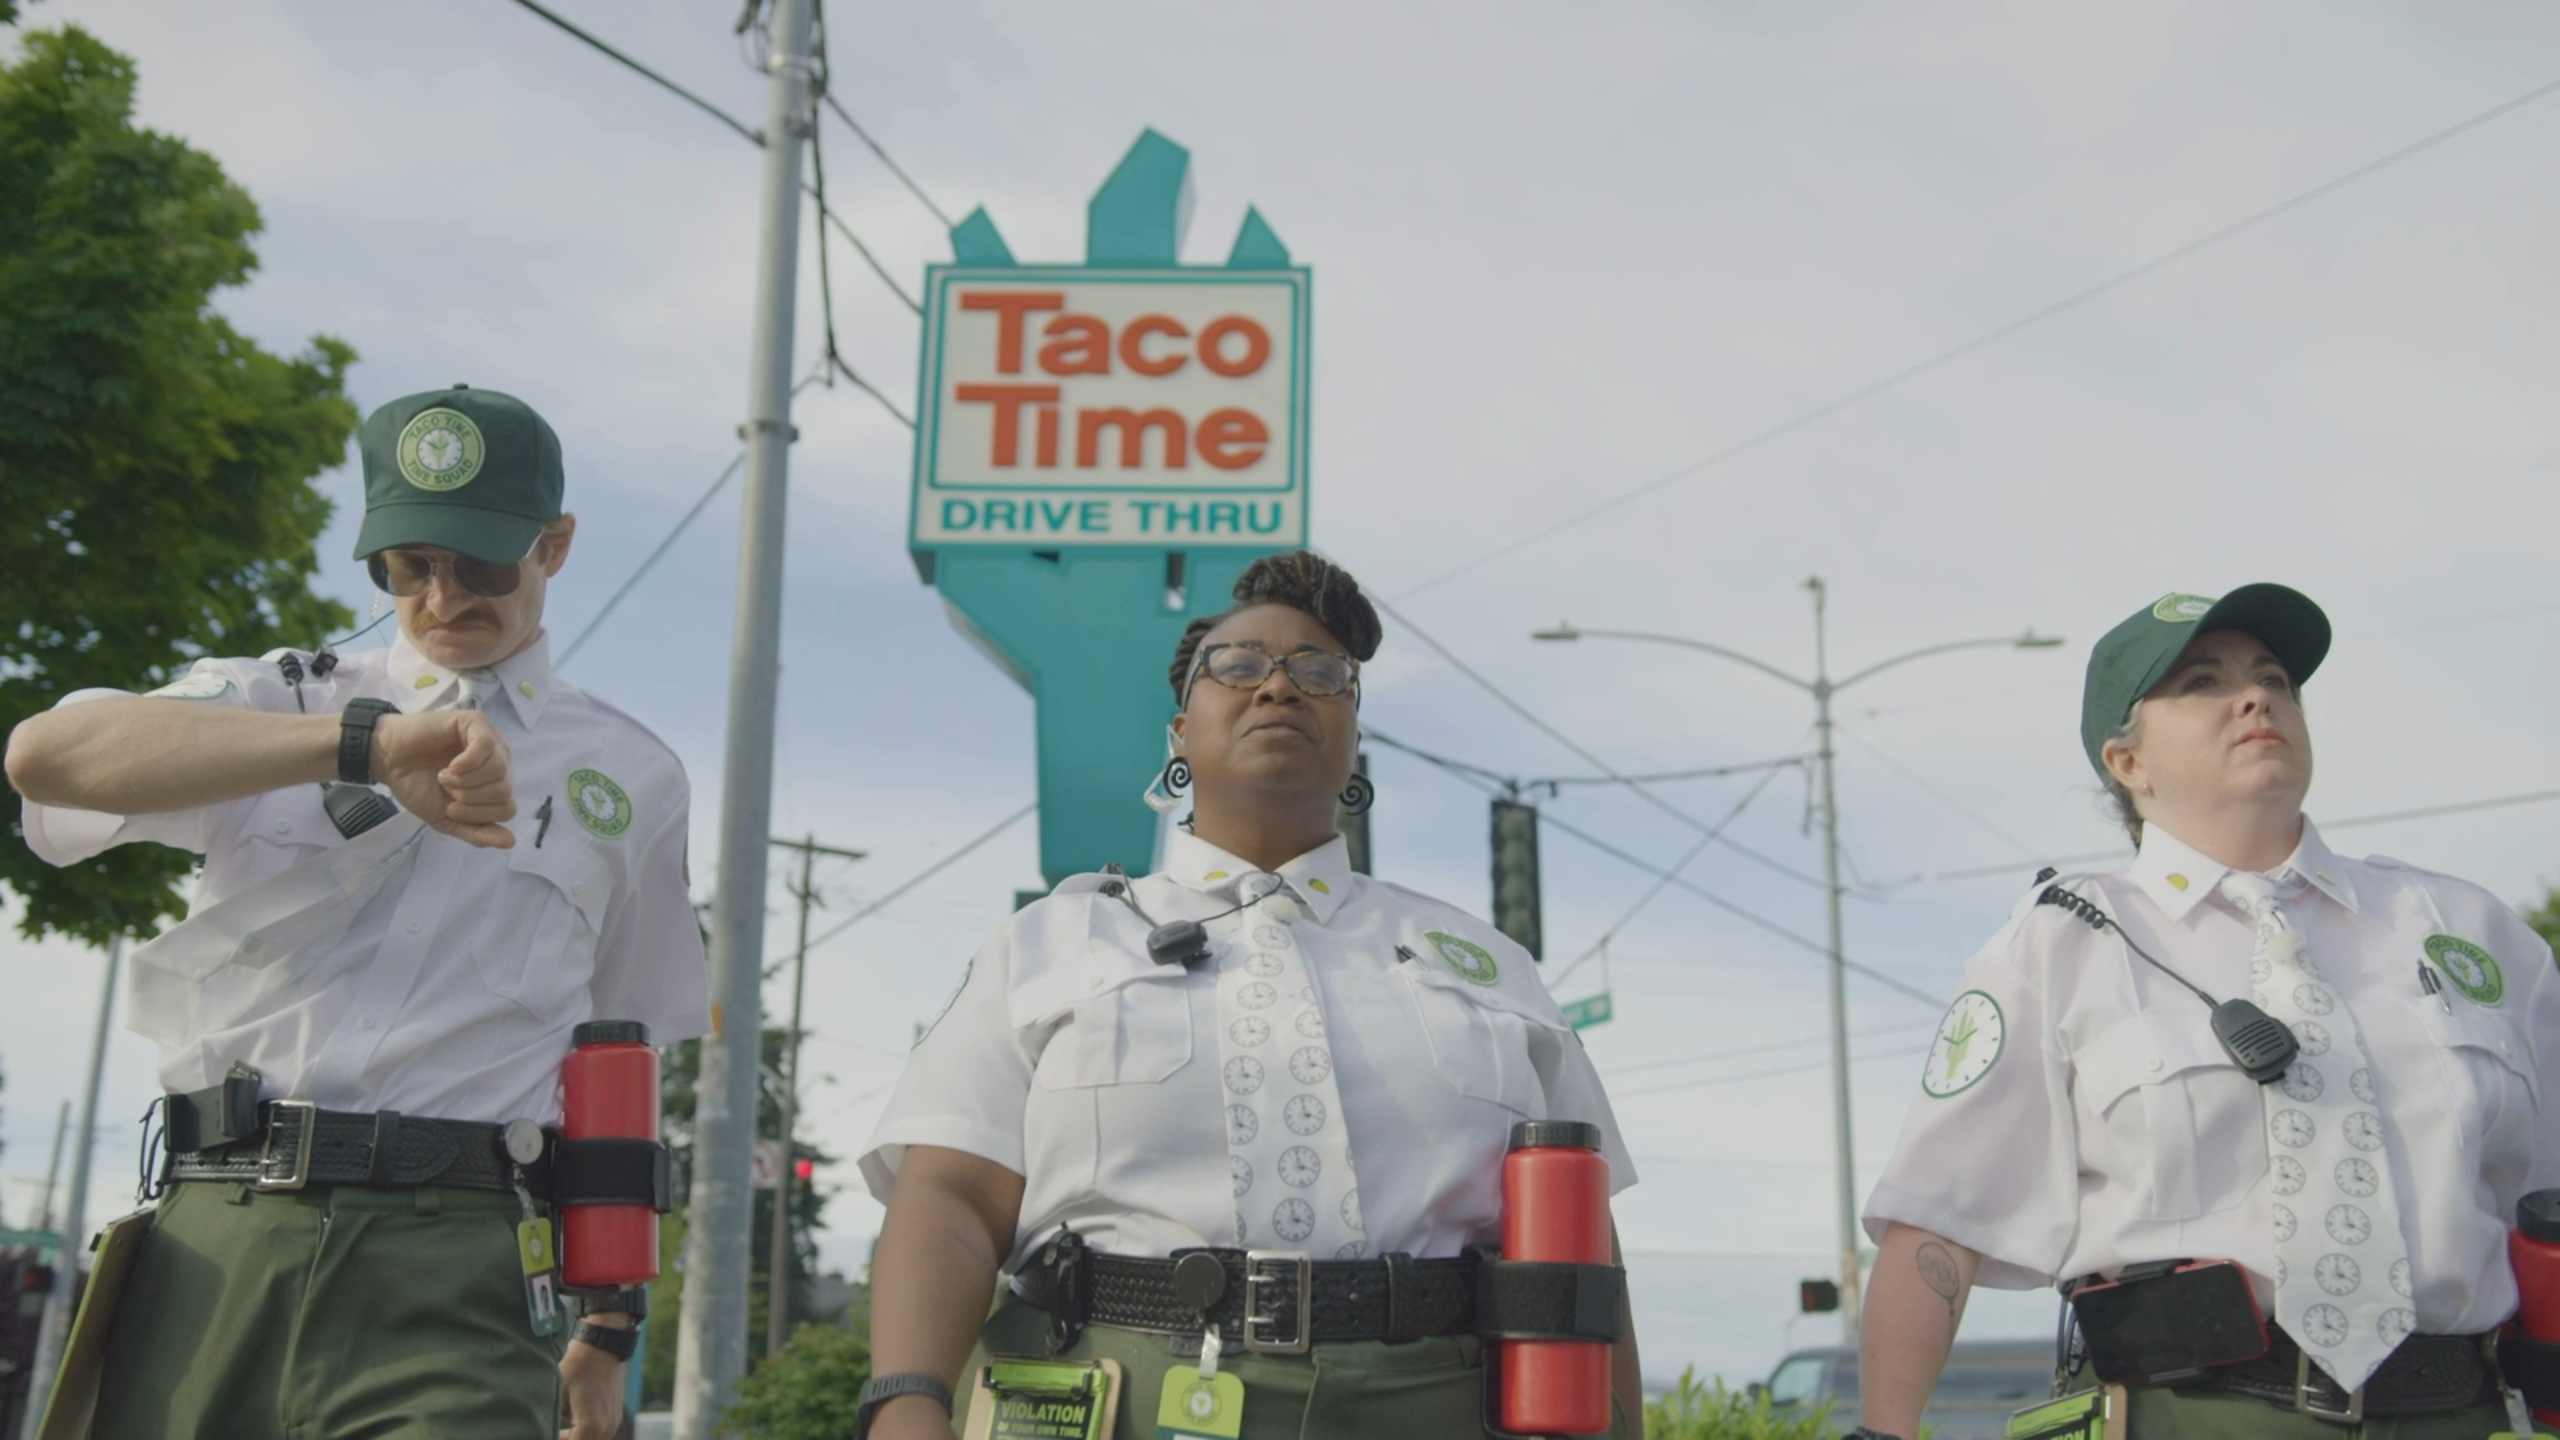 Taco Time Takes on Time Wasters in New Campaign from DNA